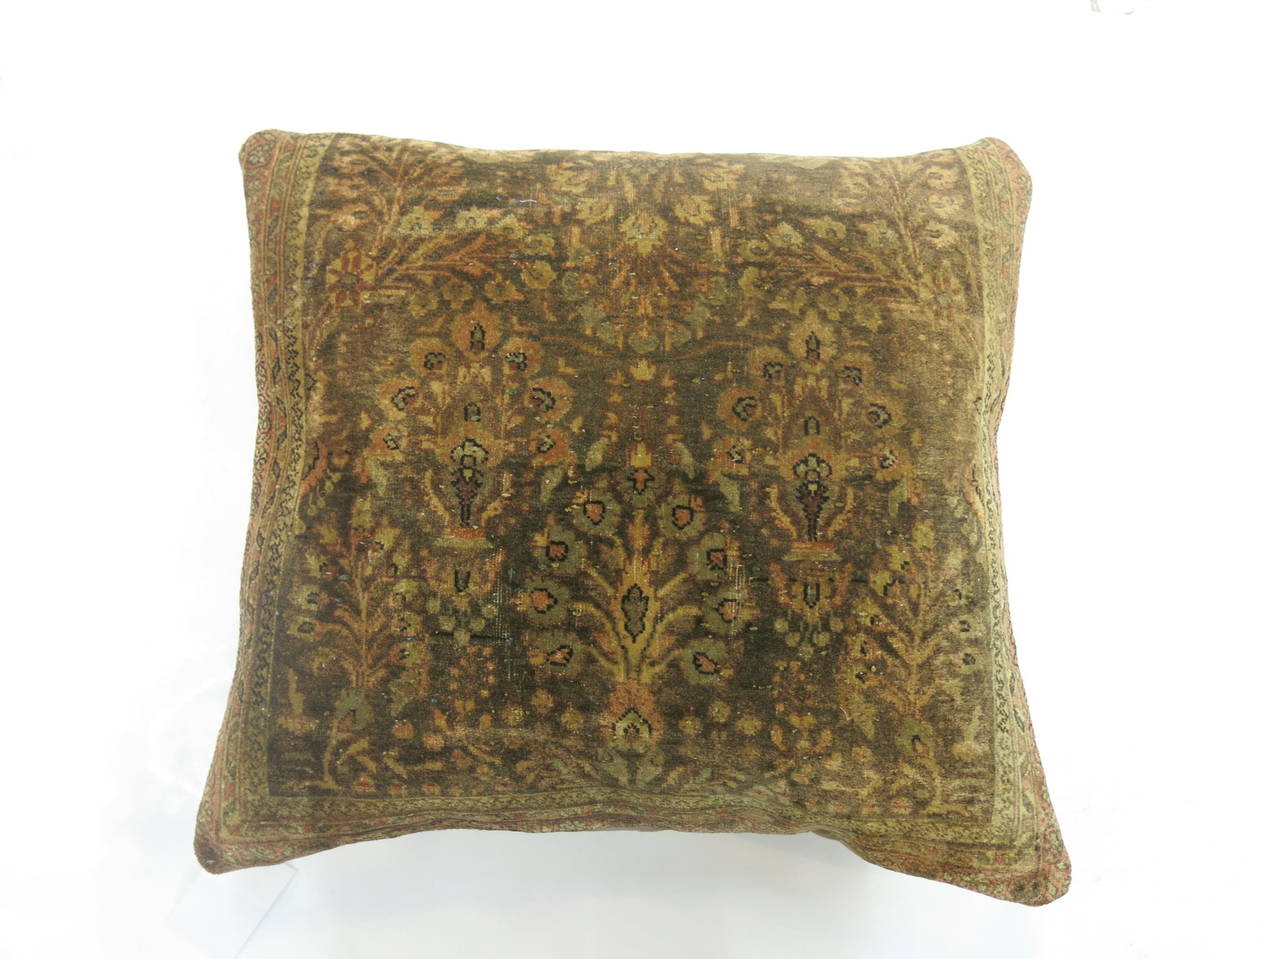 An exquisite set of large square pillows from an antique Persian Sarouk Ferehan rug. Backed in khaki cotton with zipper closures on each. Great texture and patina. Each pillow measures 20'' x 22''. 